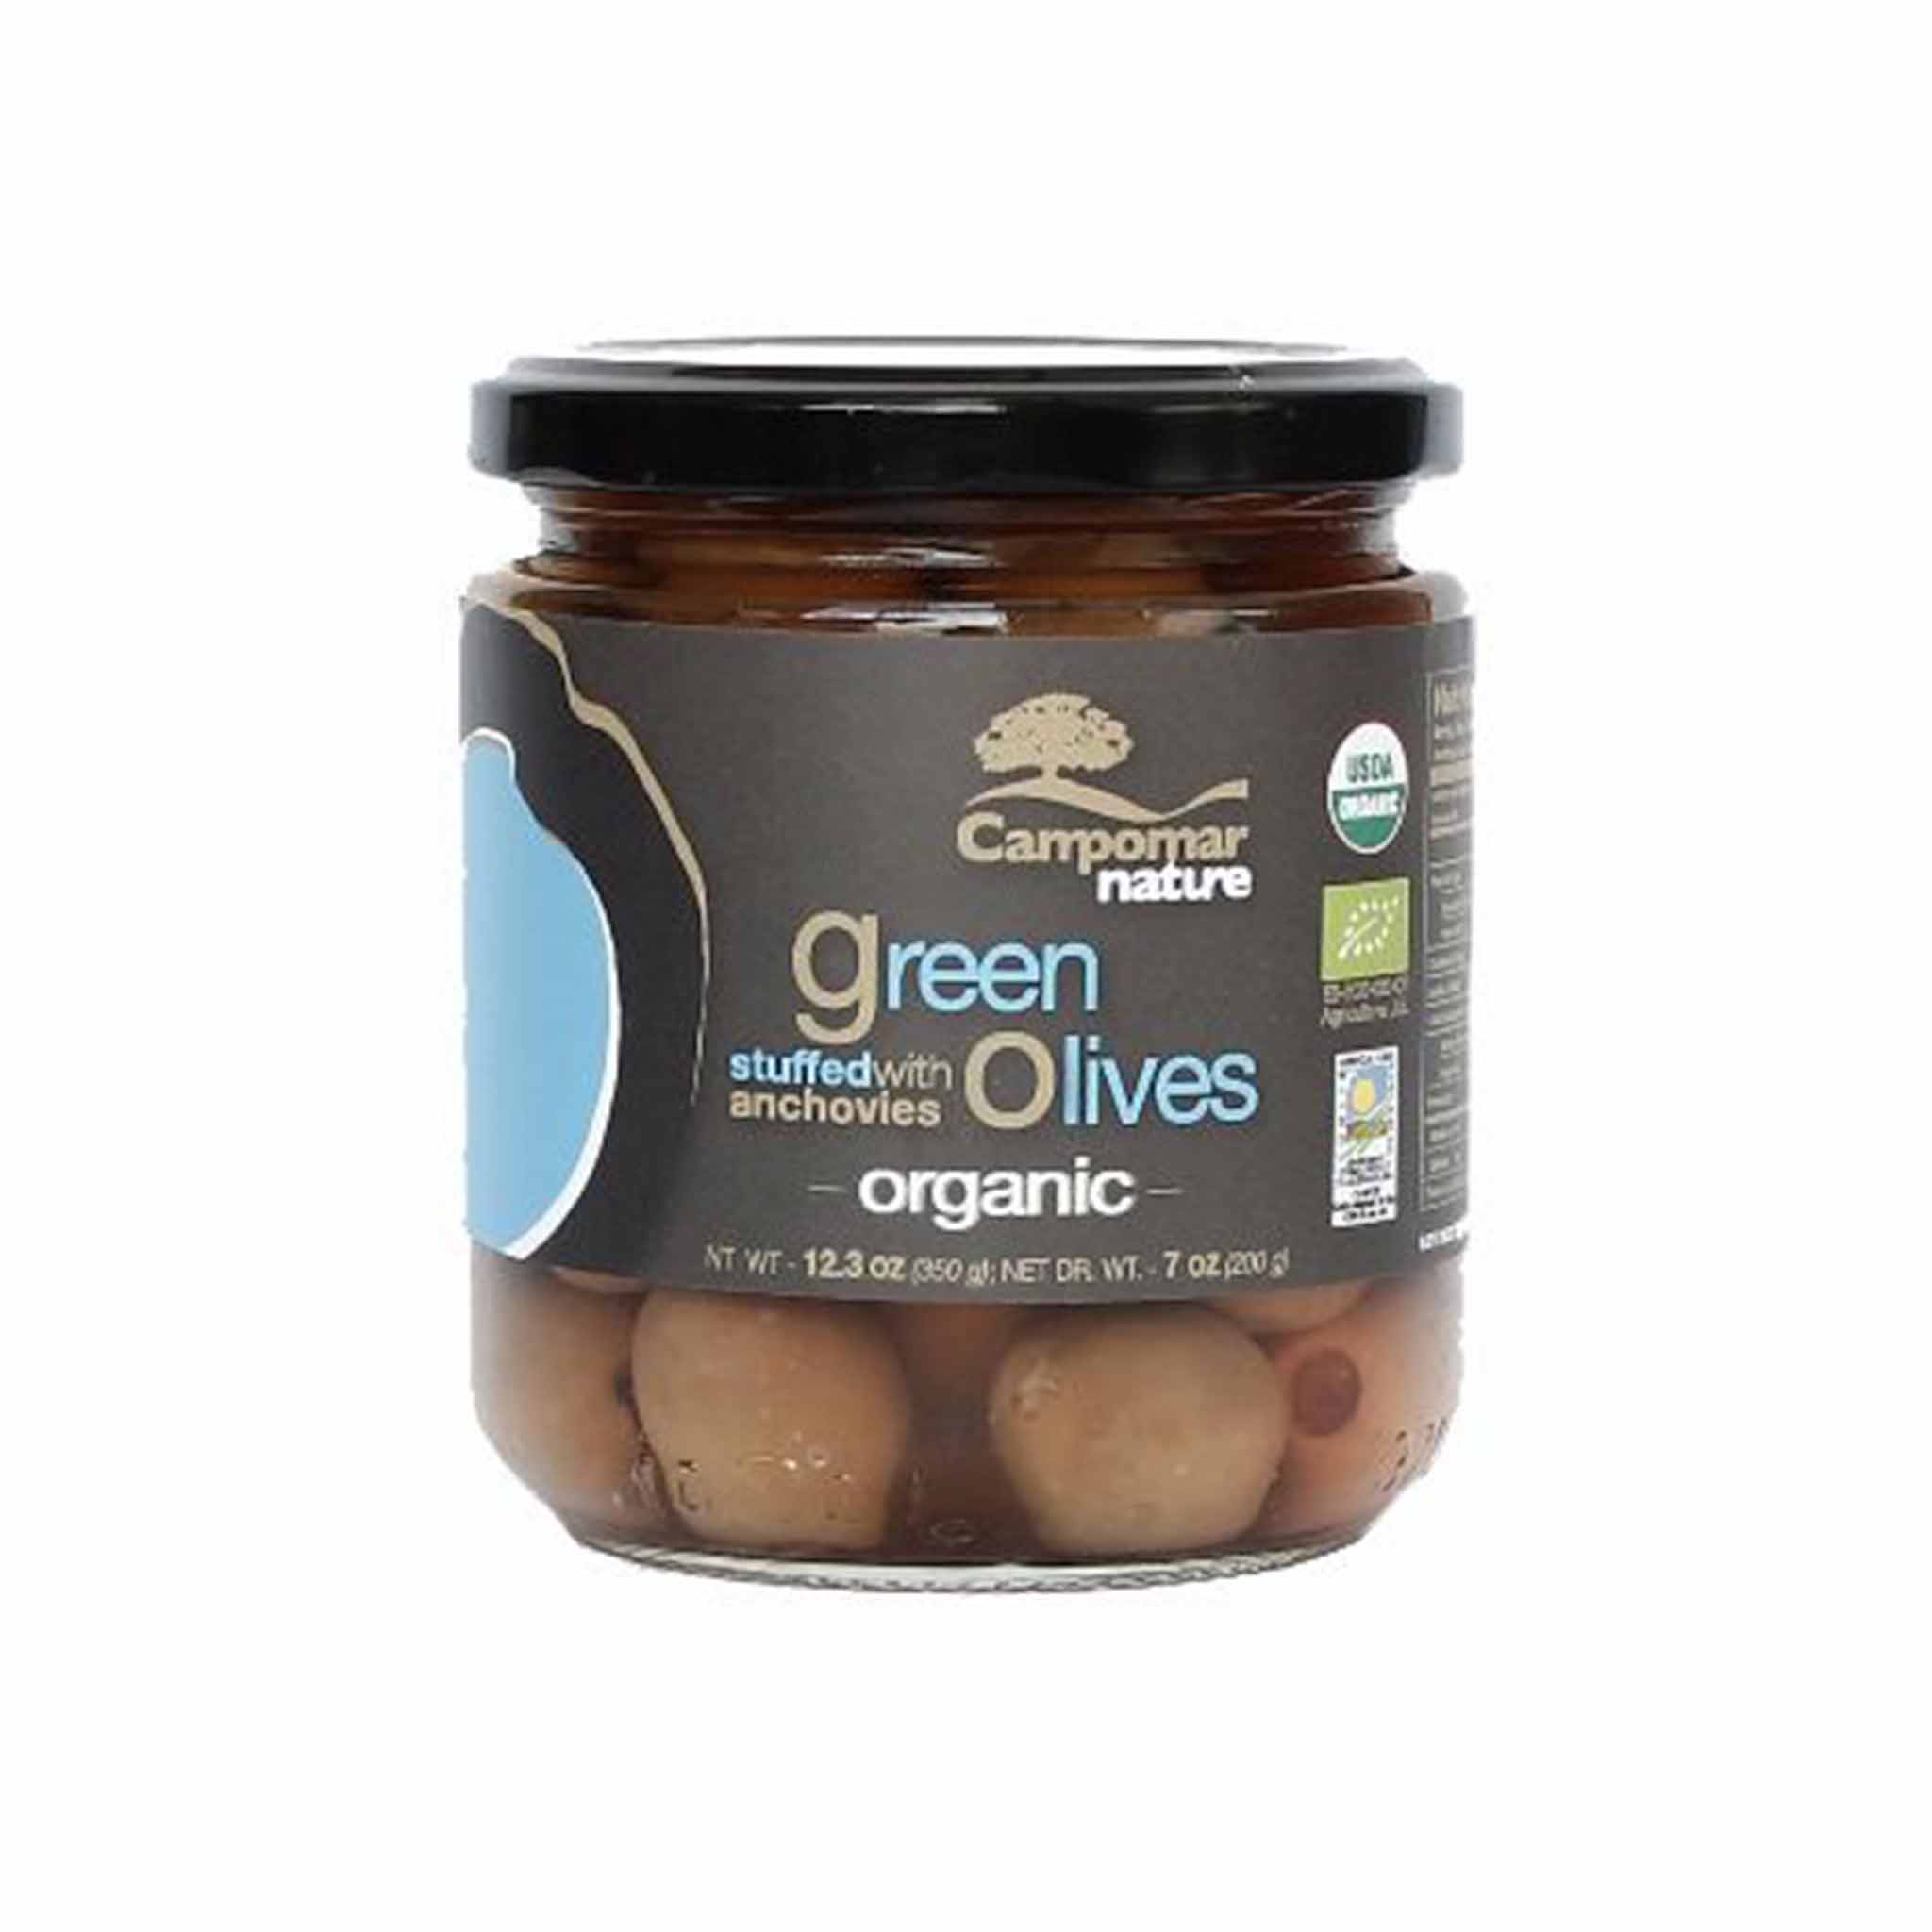 CAMPOMAR NATURE ORGANIC GREEN OLIVES STUFFED WITH ANCHOVIES 350g